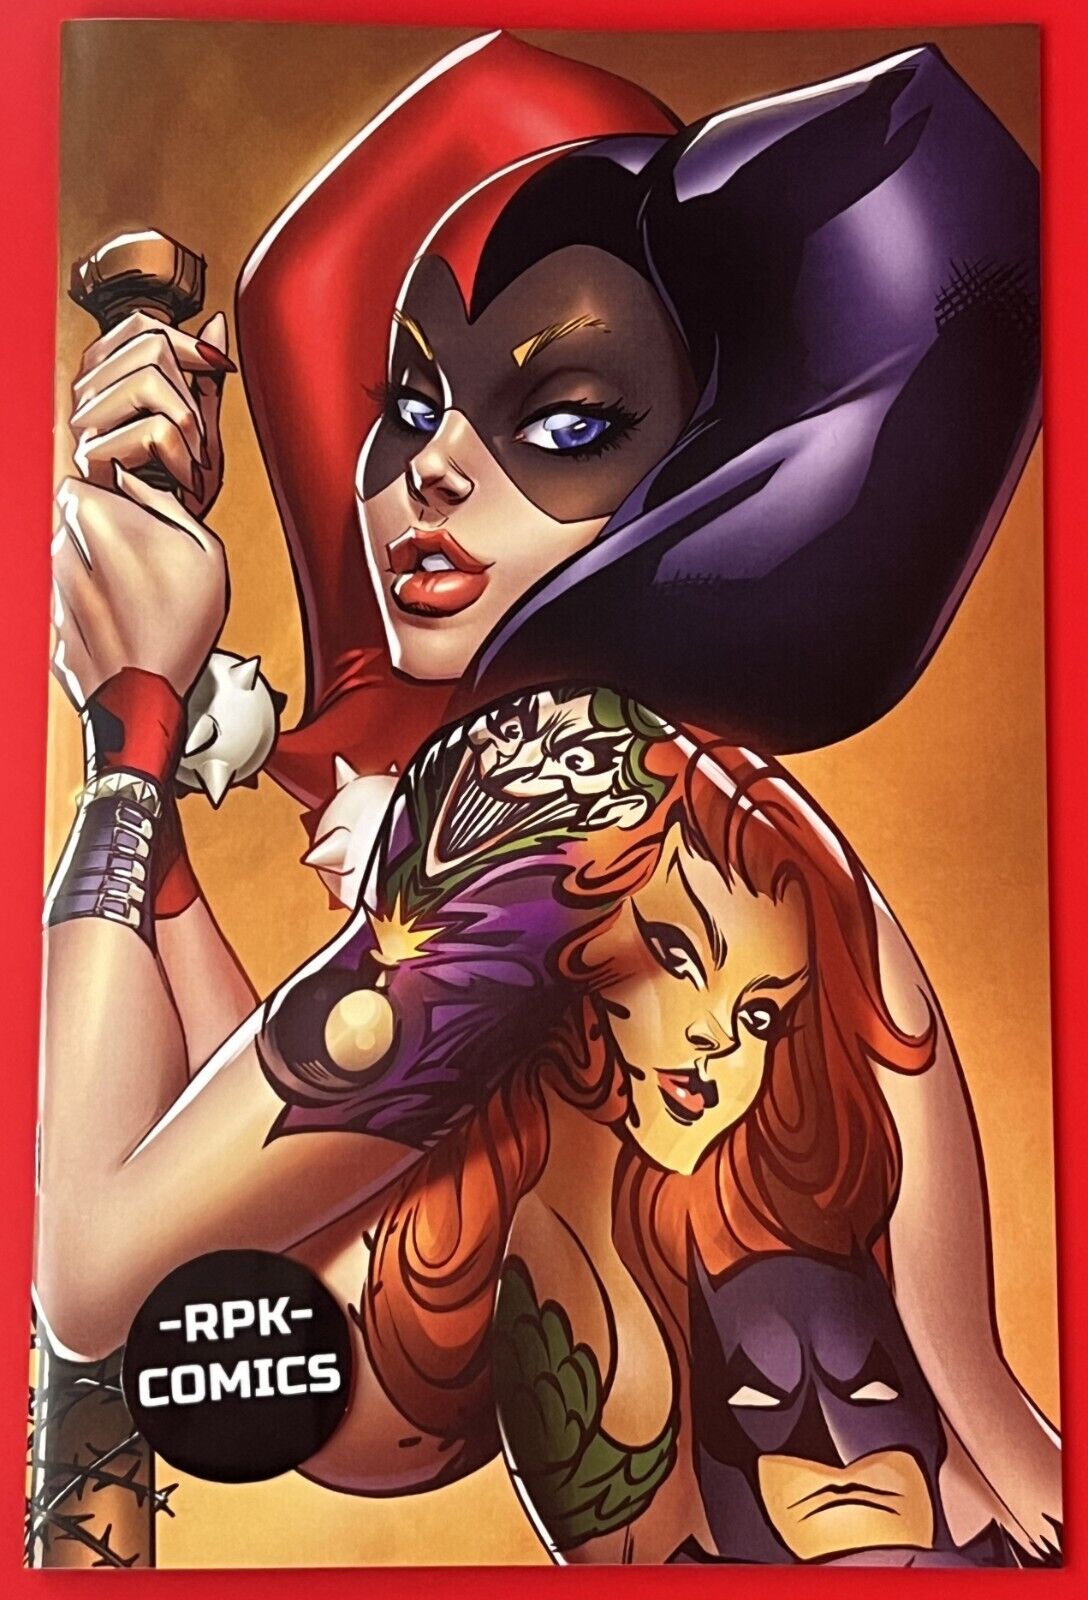 POWER HOUR #1 Harley Quinn Ale Garza Cosplay Exclusive Naughty Close Up Variant